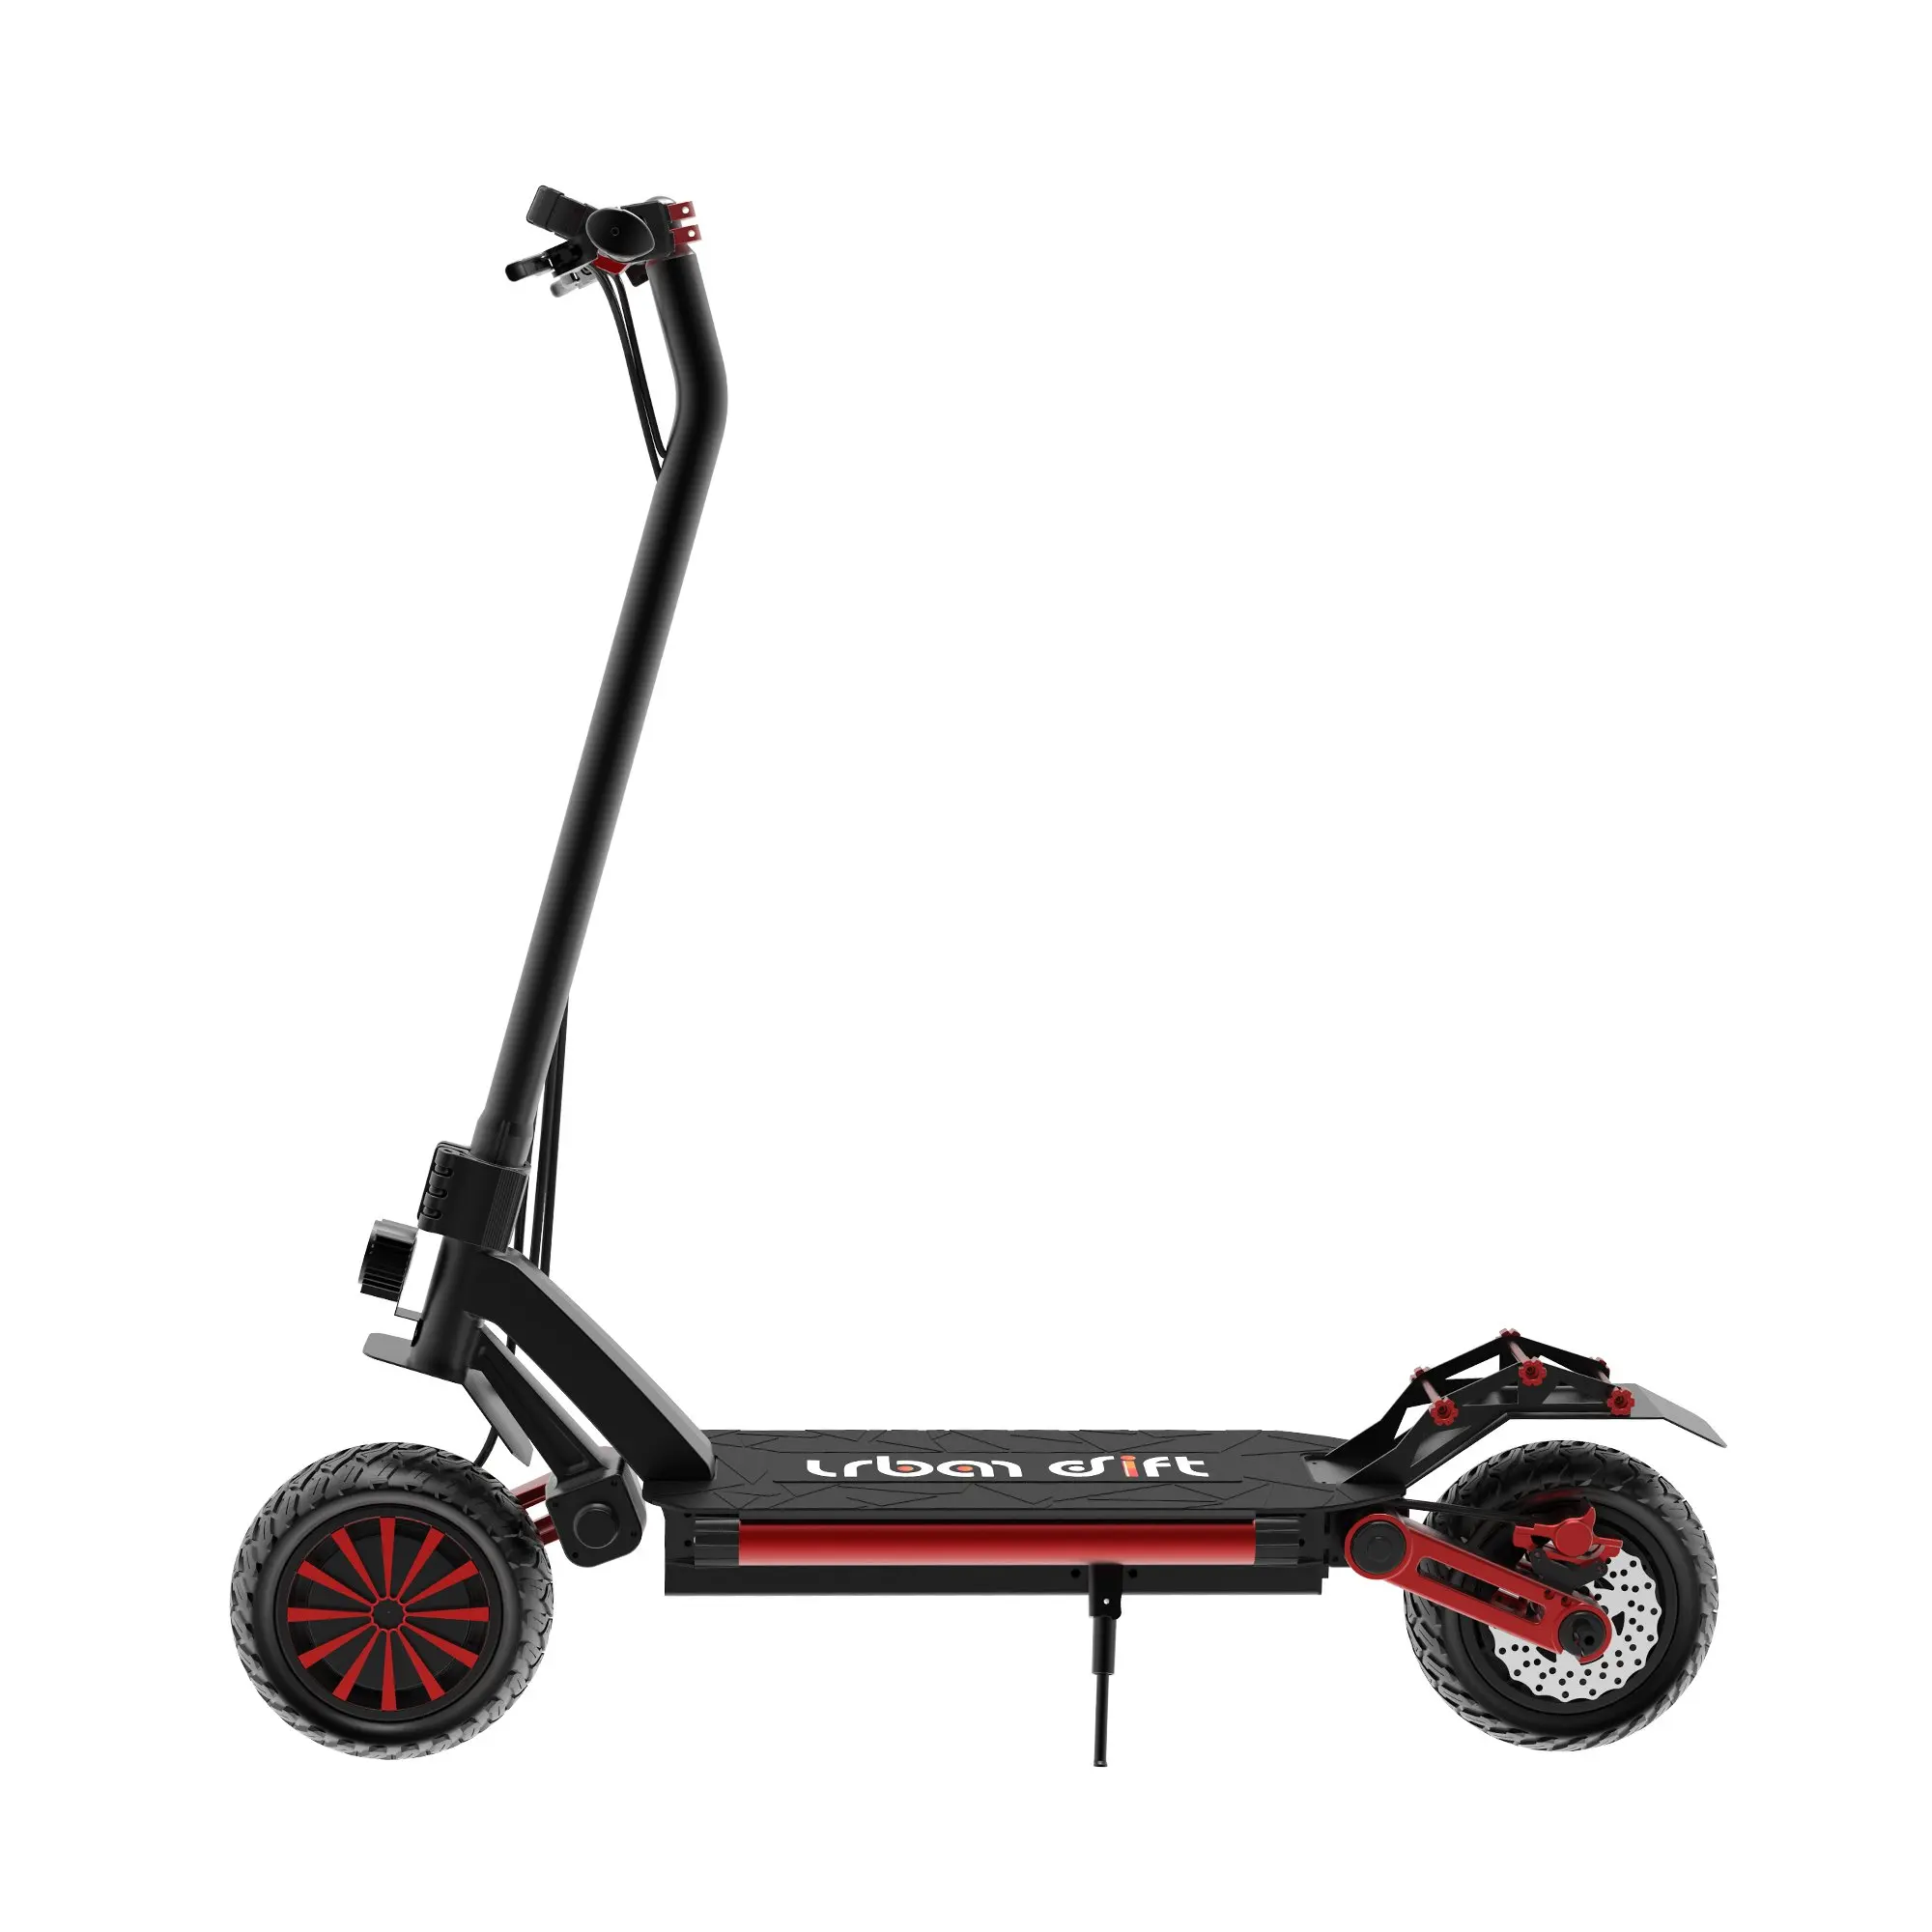 

USA Warehouse Urben Drift S011 dual motor electric scooter 1600w 52V 20Ah, Black with red decor